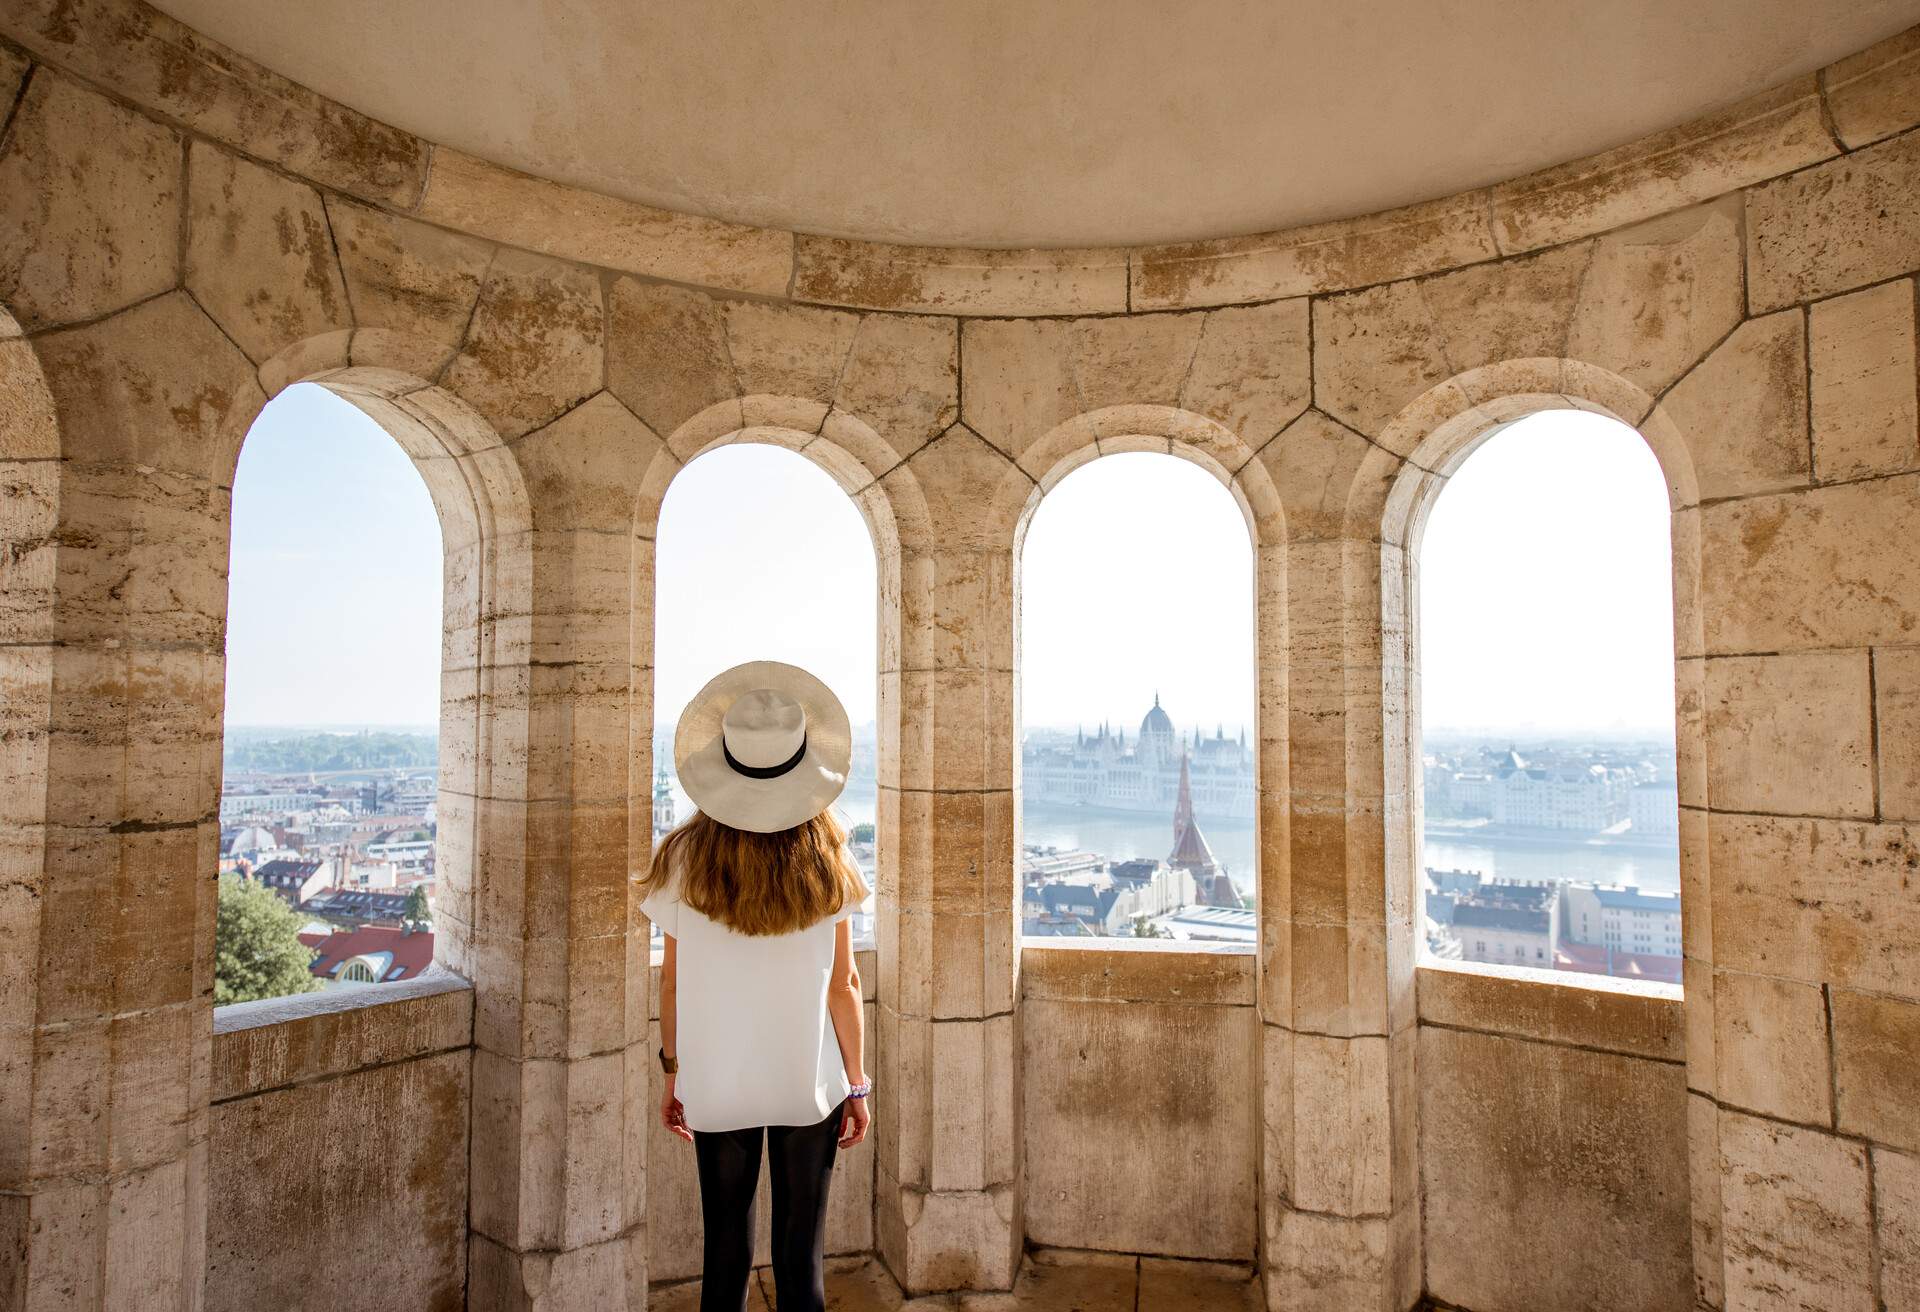 Young woman tourist enjoying cityscape view from the terrace with arches traveling in Budapest, Hungary; Shutterstock ID 1115991713; Purpose: KAYAK MGZN luxury on a shoestring; Brand (KAYAK, Momondo, Any): Any